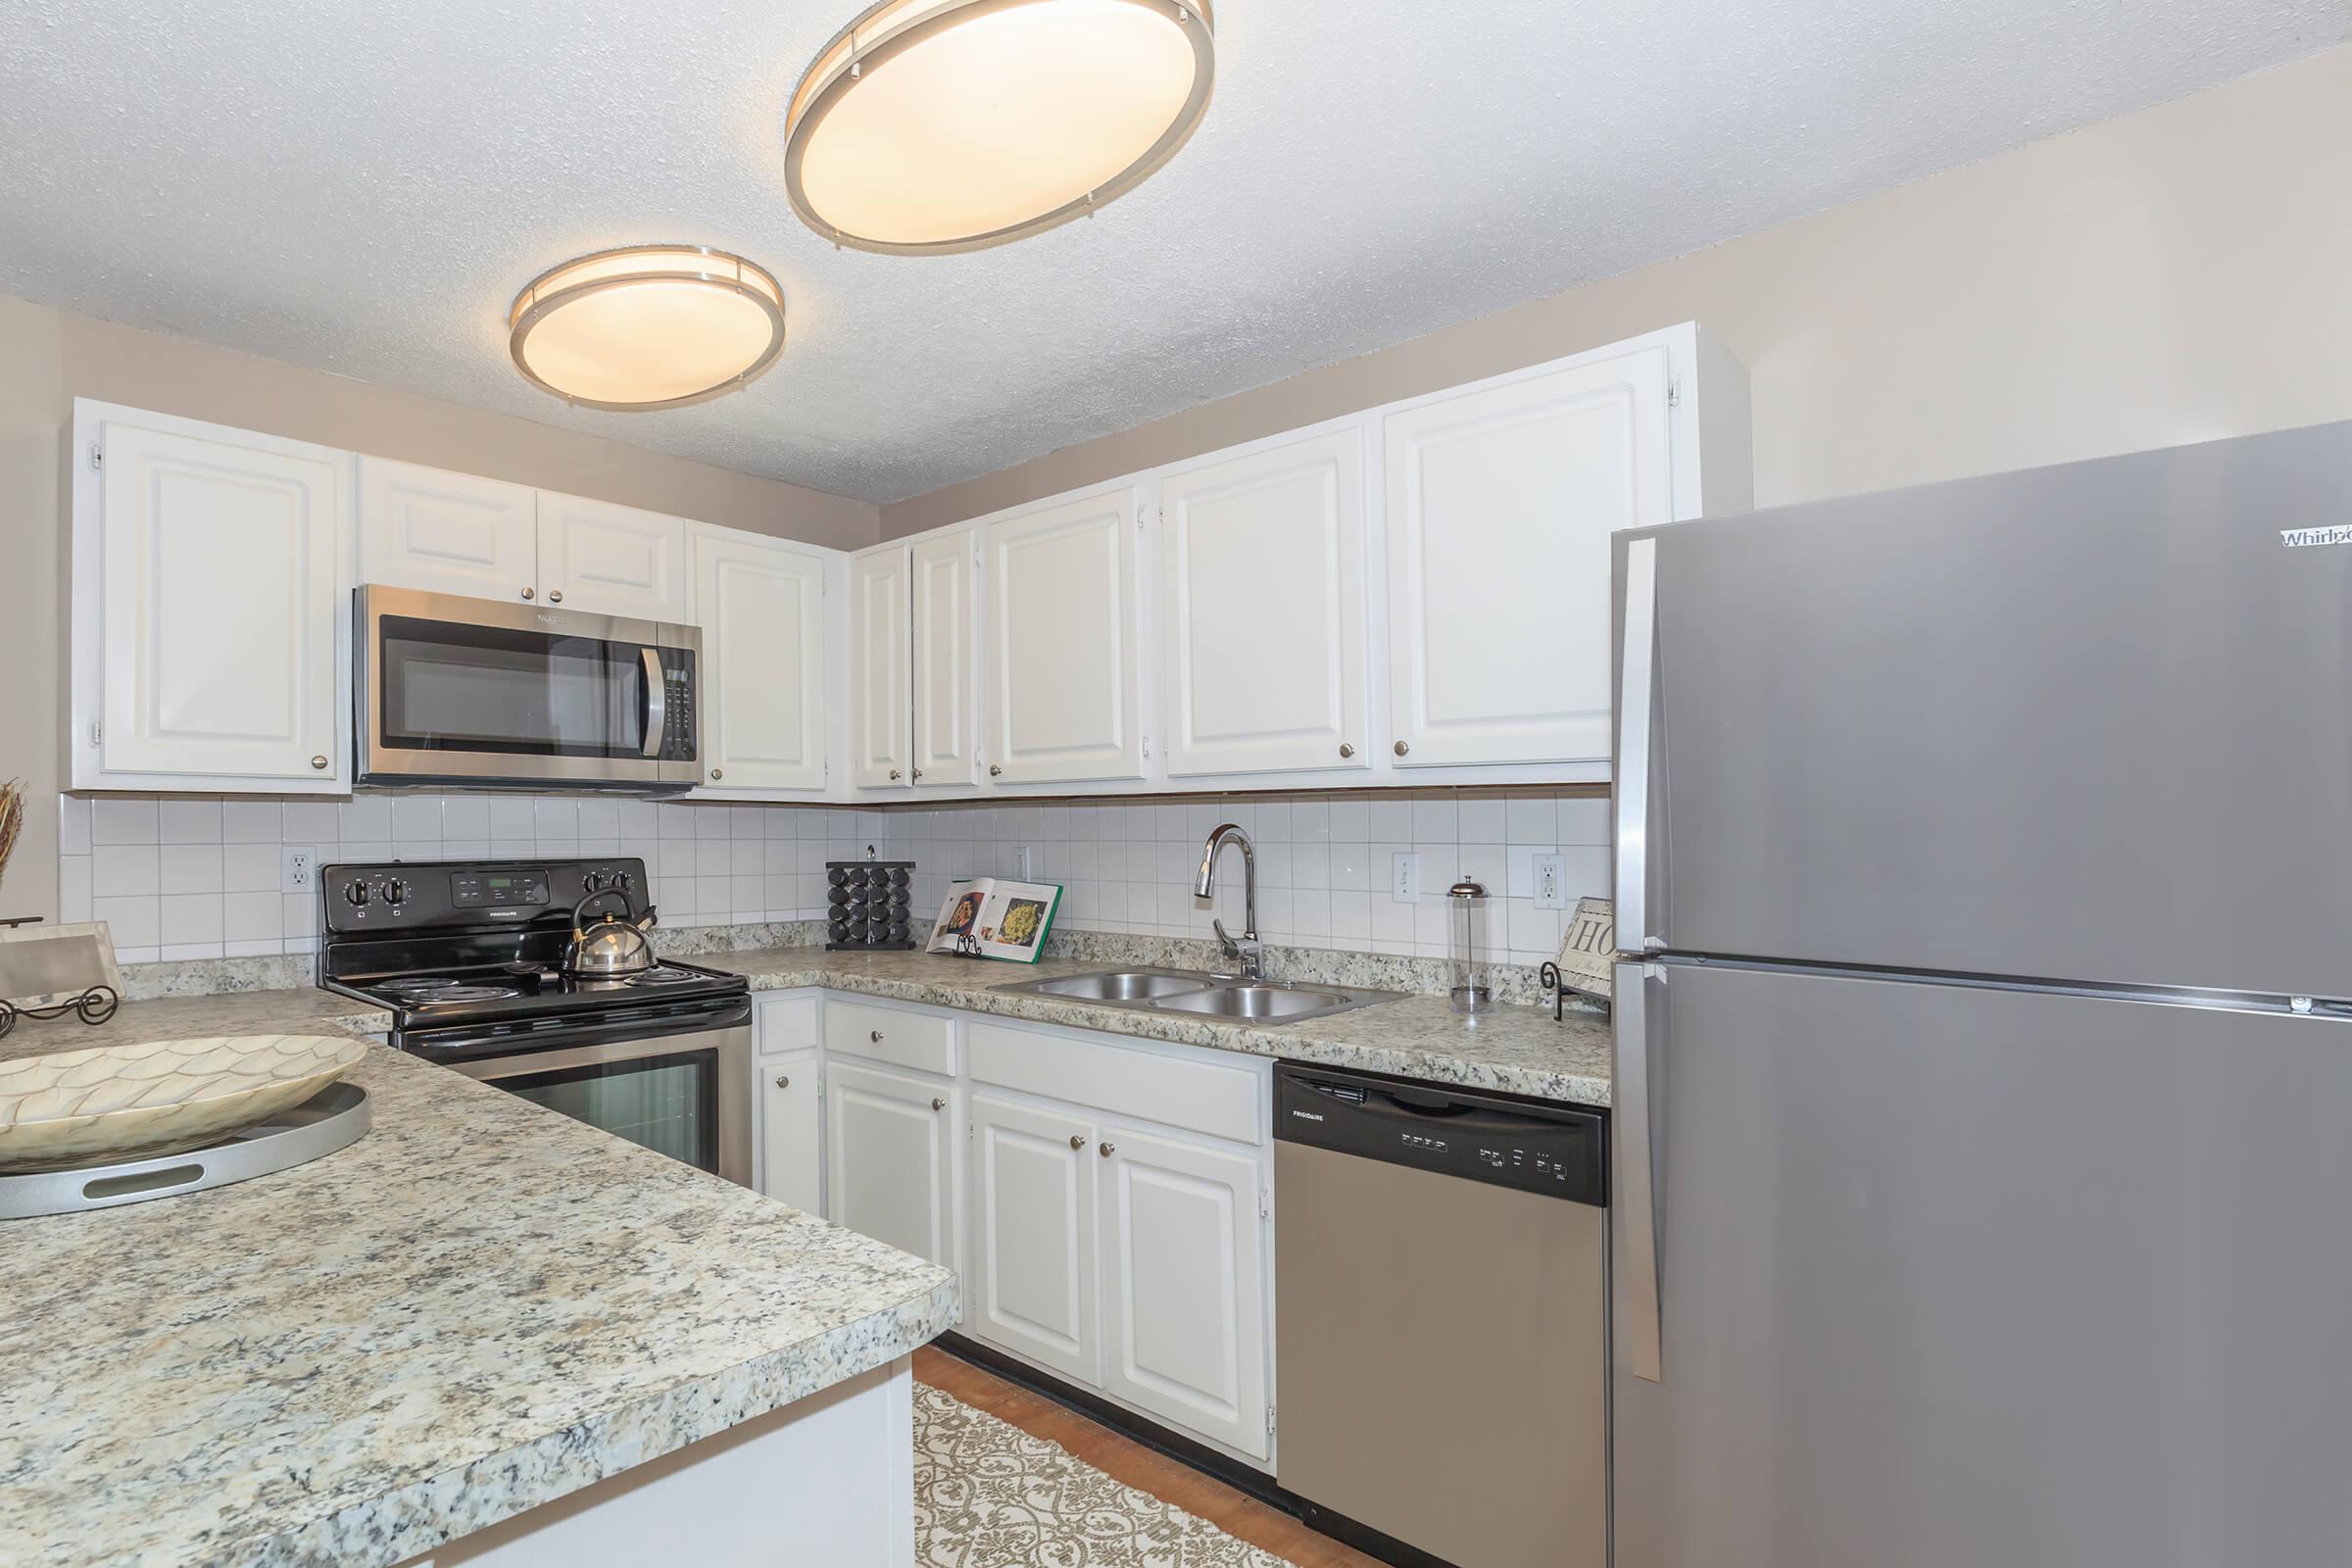 ALL-ELECTRIC KITCHENS IN 2 BEDROOM APARTMENTS FOR RENT